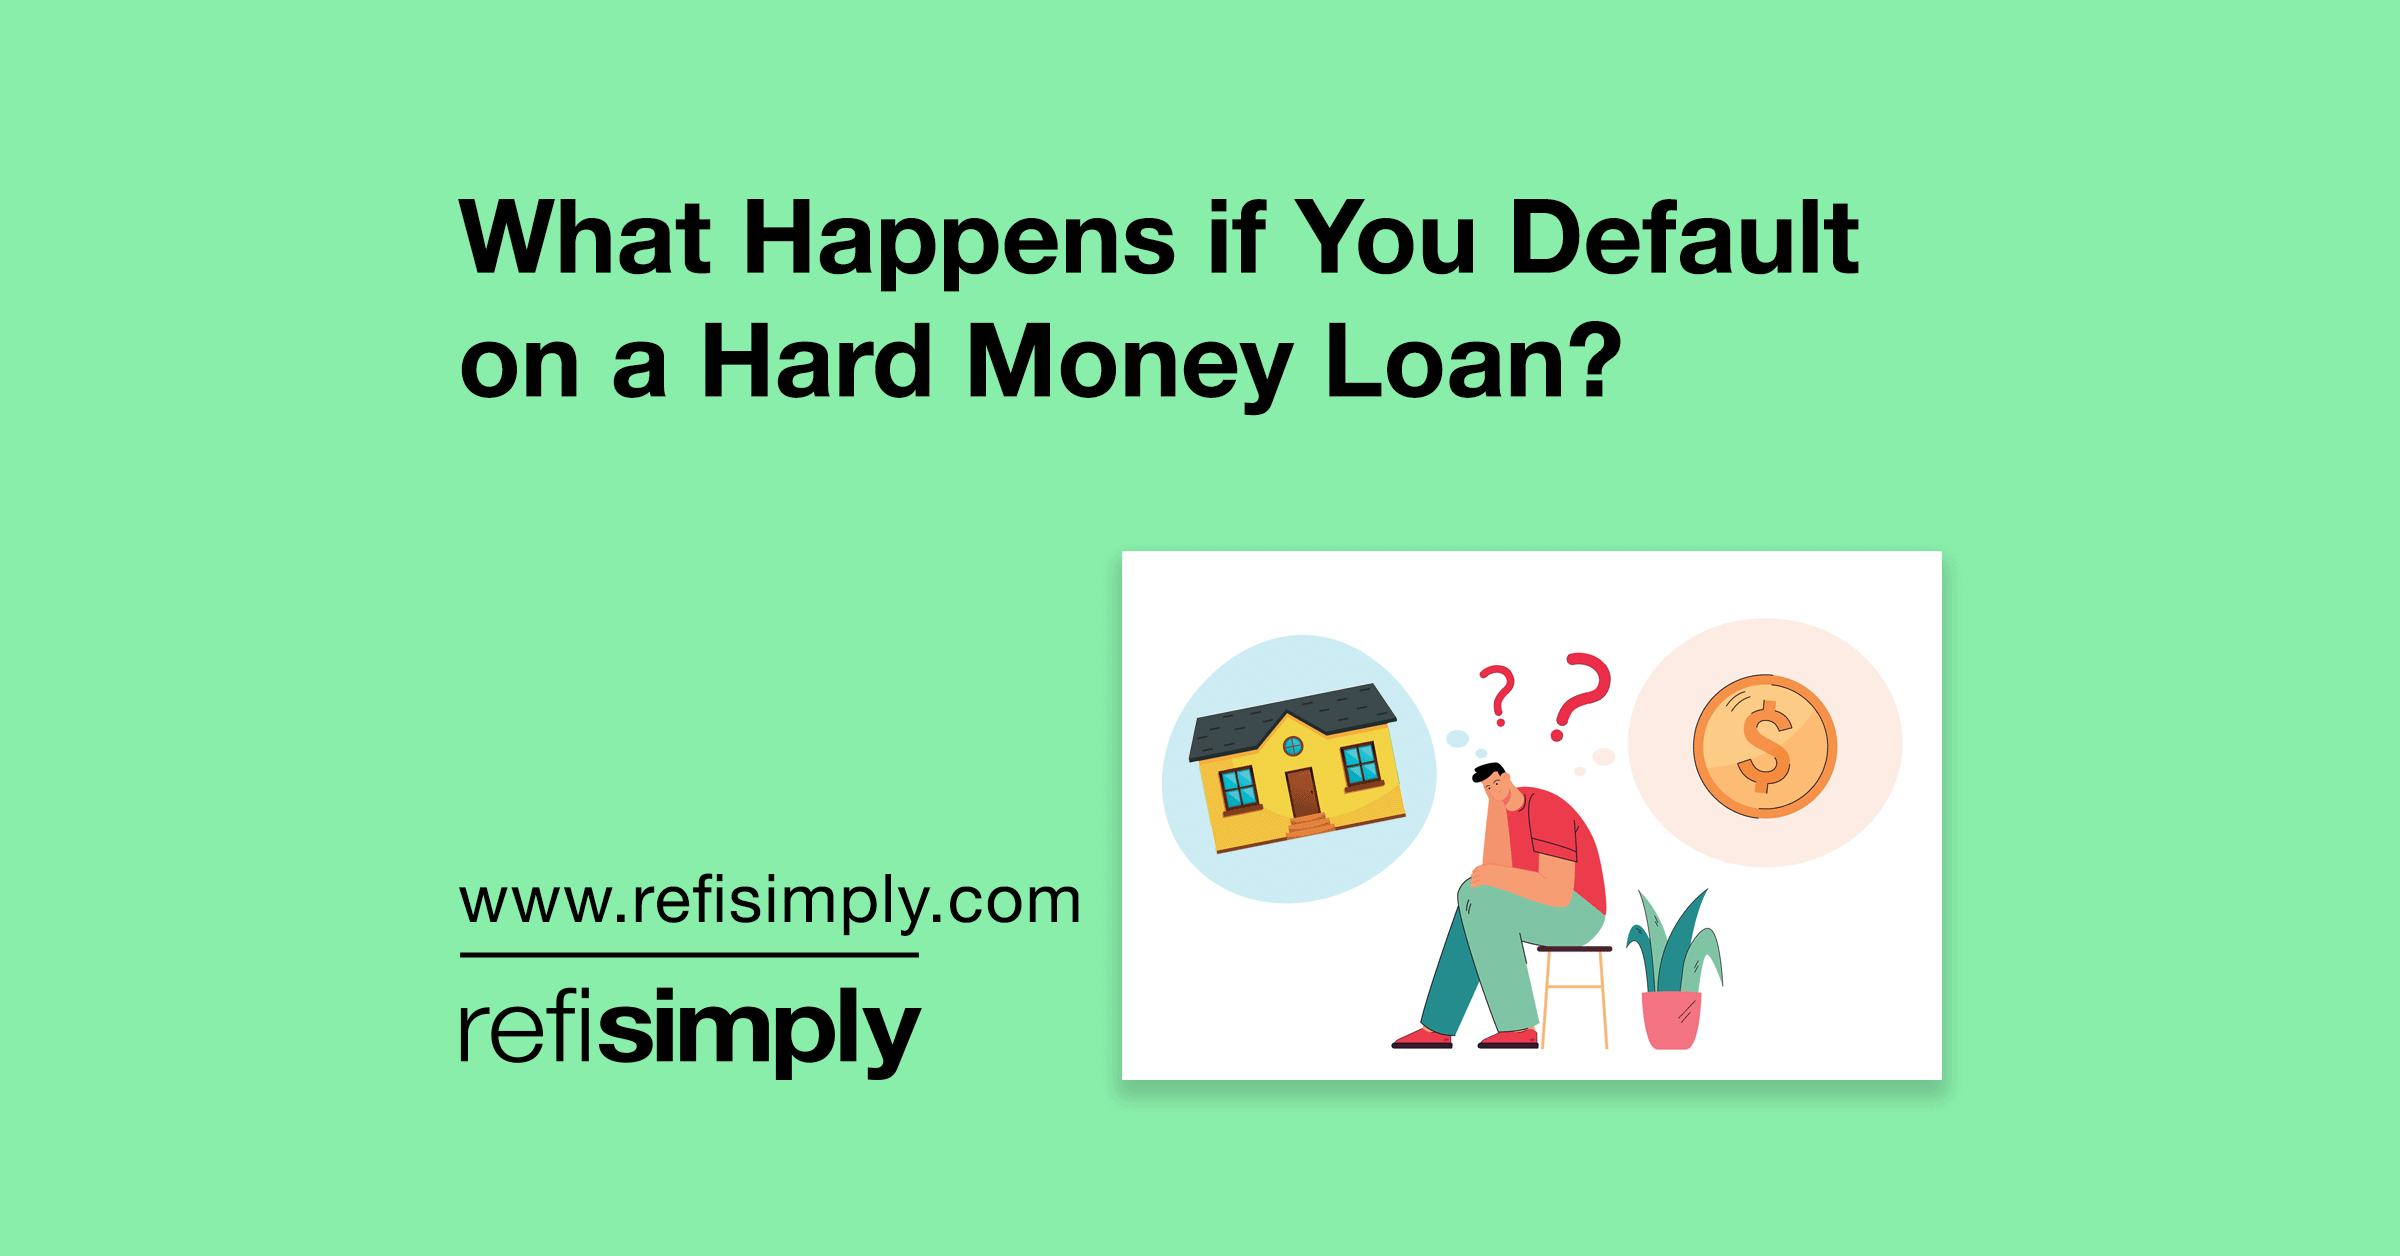 what happens if you default on a hard money loan?